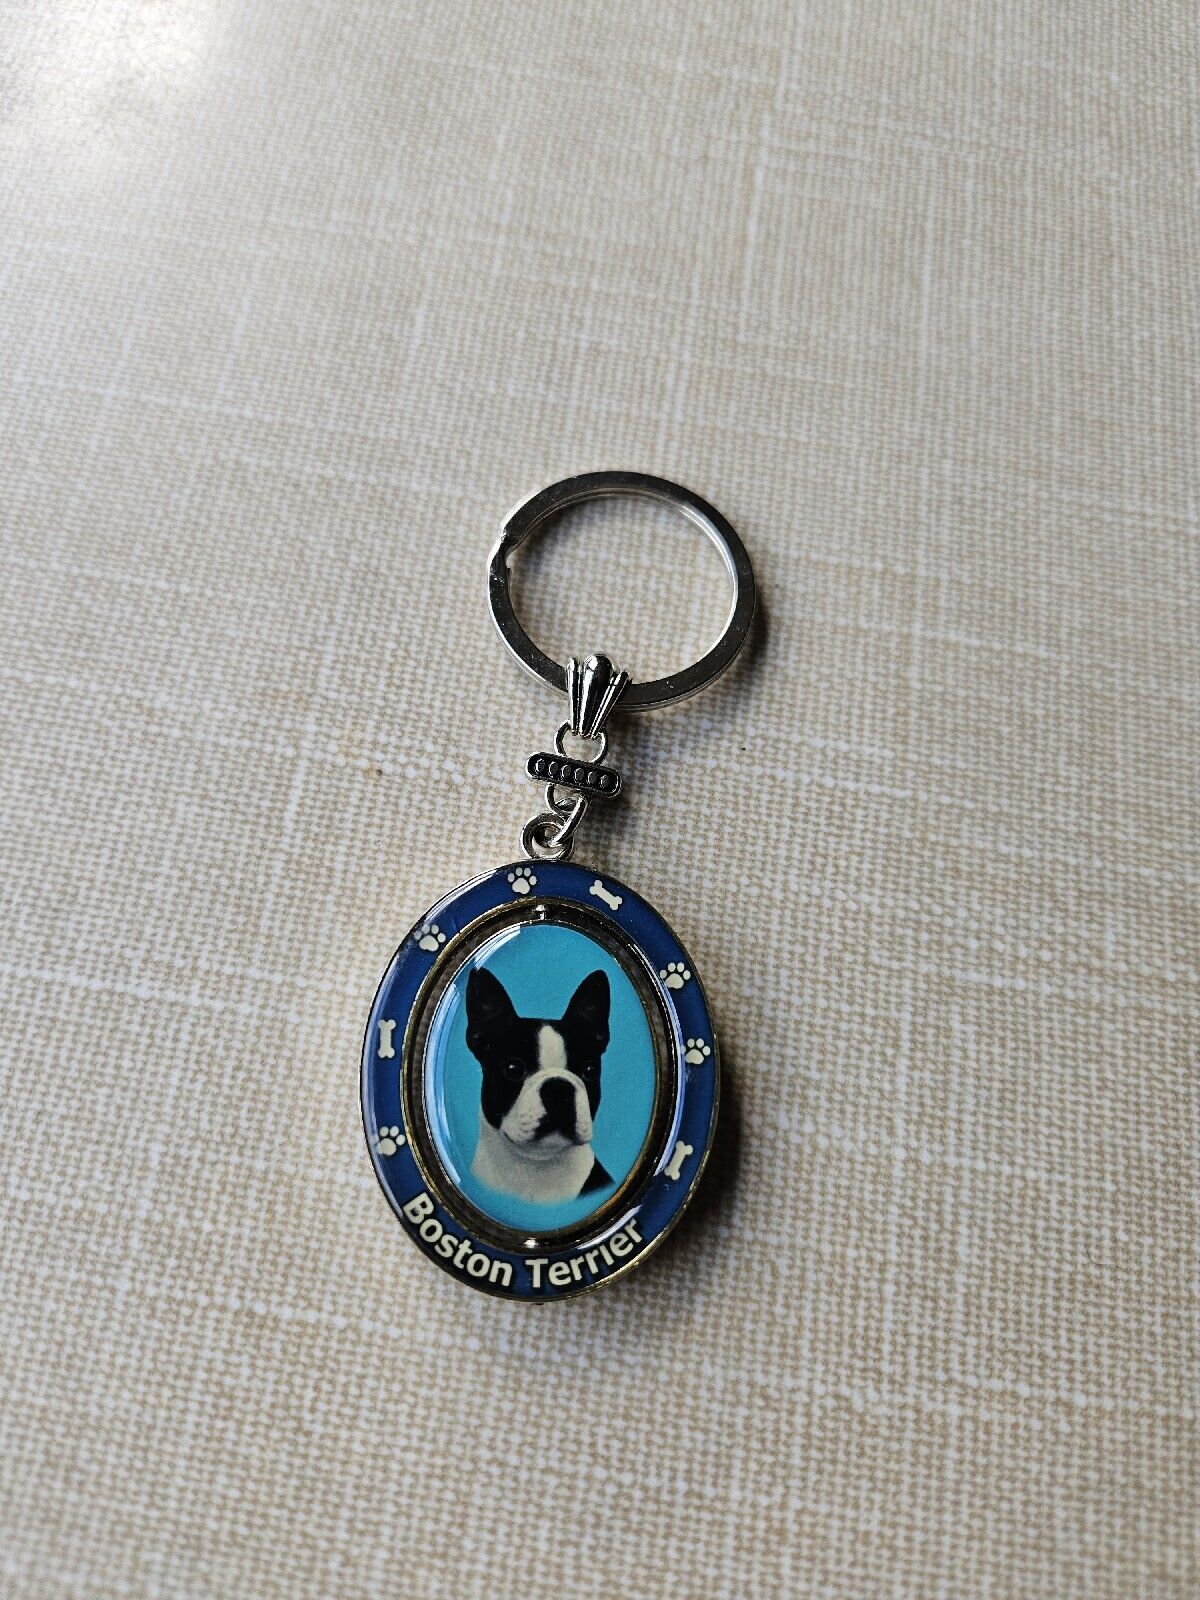 VINTAGE NOS DOUBLE-SIDED Boston Terrier Dog Keychain BOSTON TERRIER KEYCHAIN 